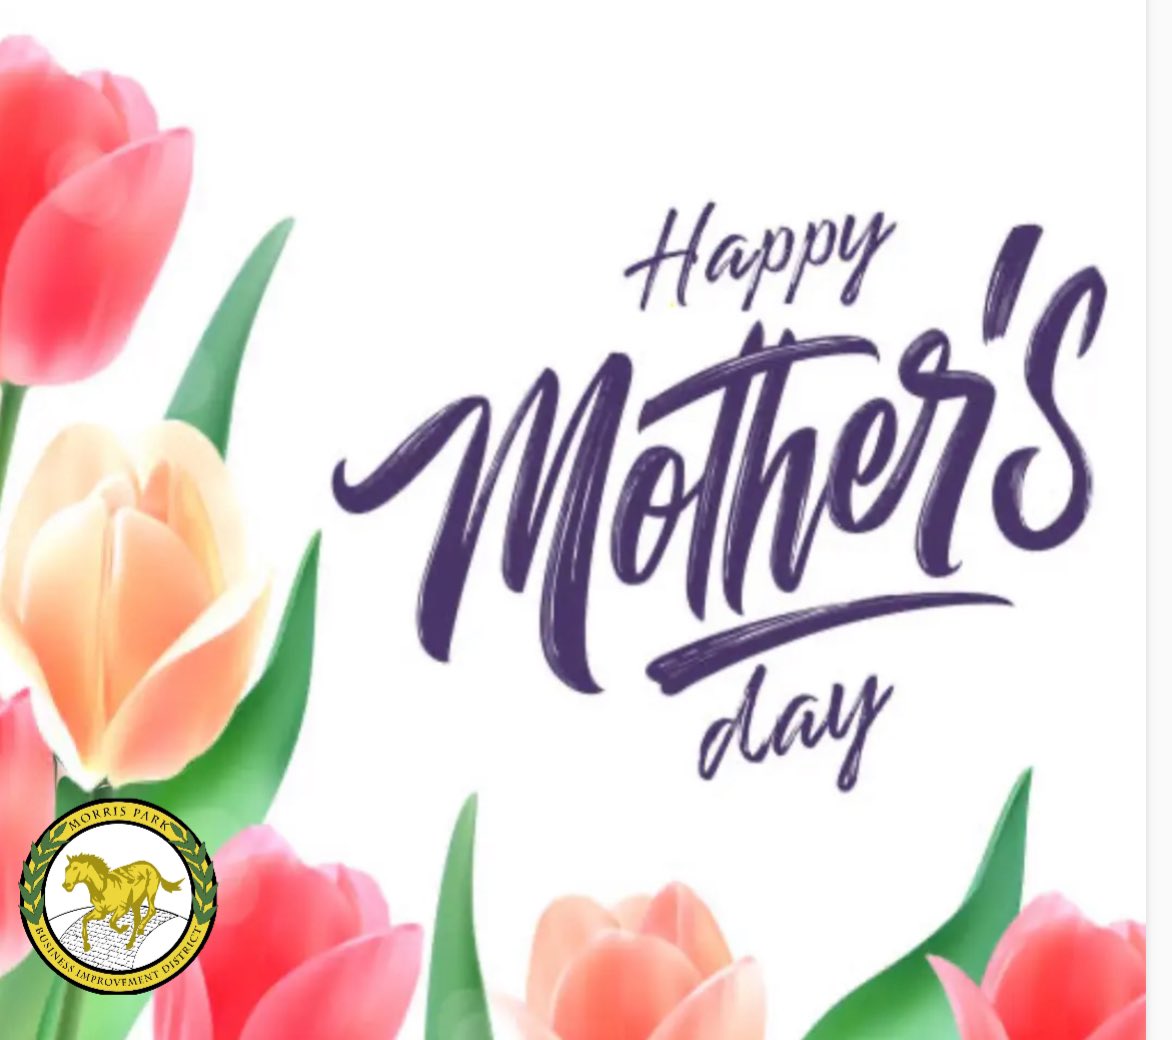 Happy Mother’s Day! To all the hard-working, generous, kind, loving and inspiring mothers of our community in #MorrisPark and the #Bronx!